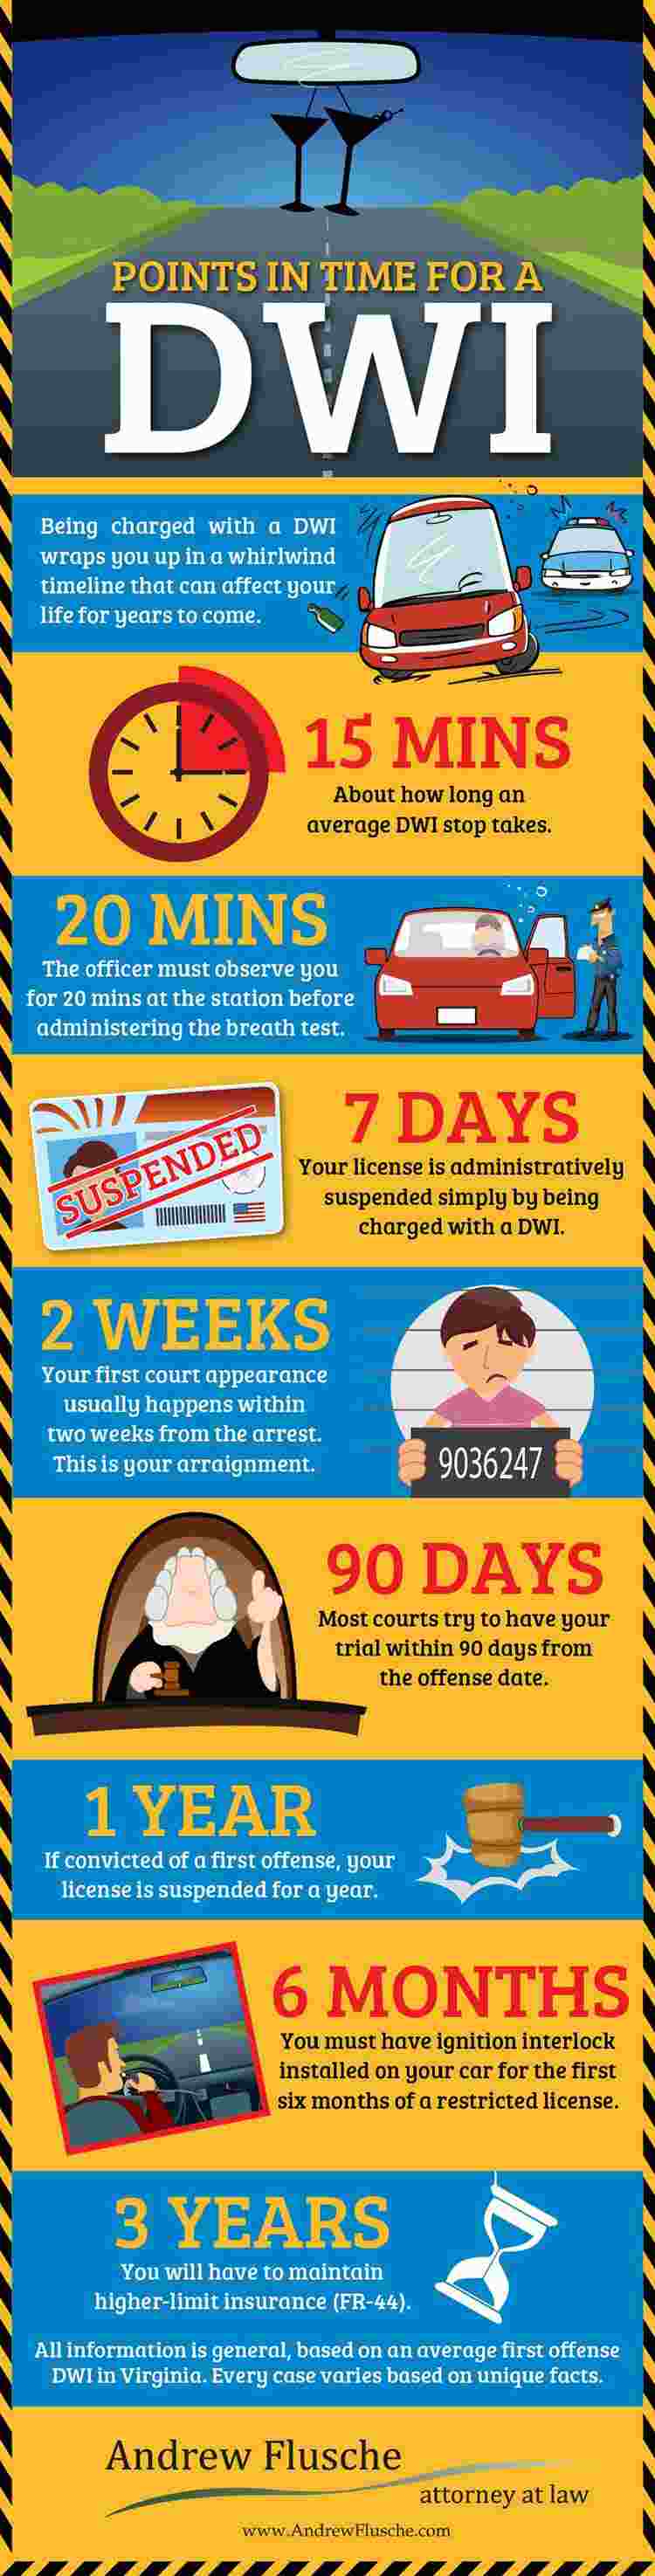 Points-in-Time-for-a-DWI-Infographic